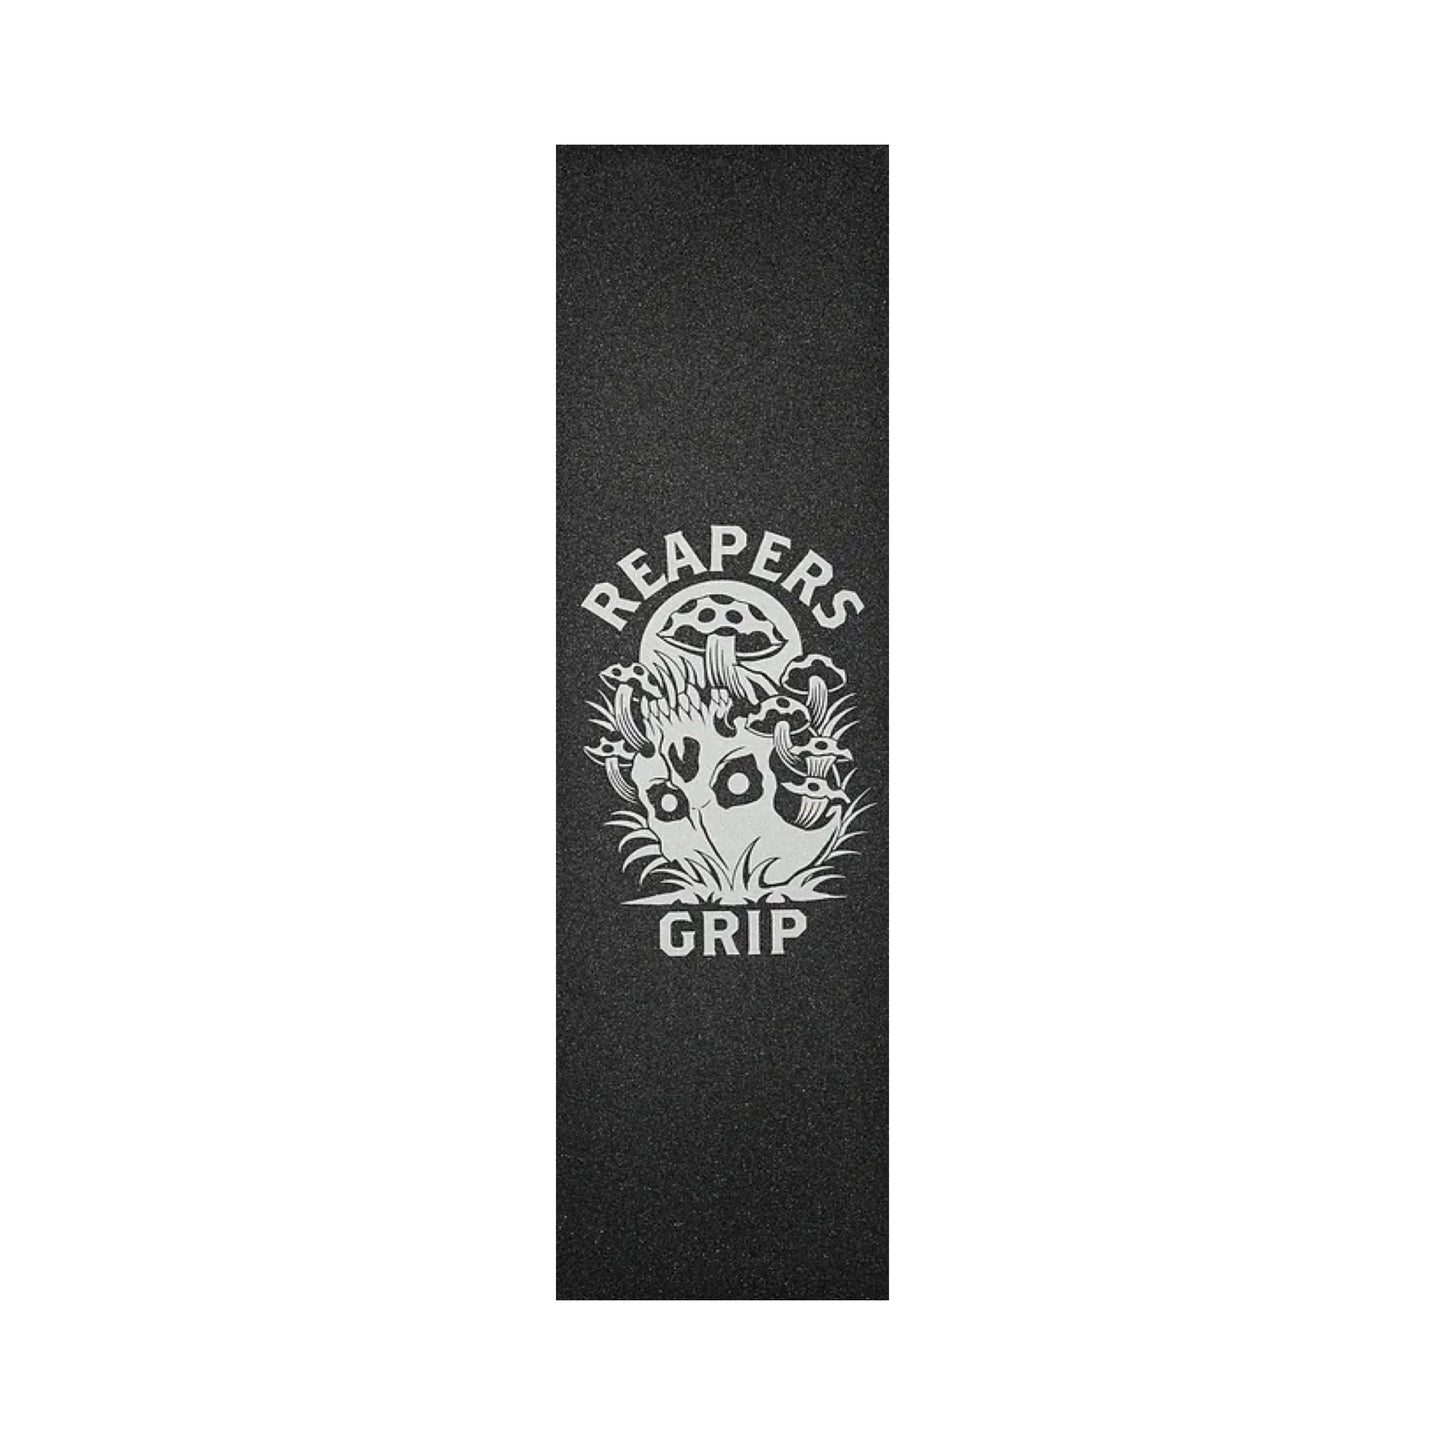 Reapers Grip Graphic Skateboard Grip Tape